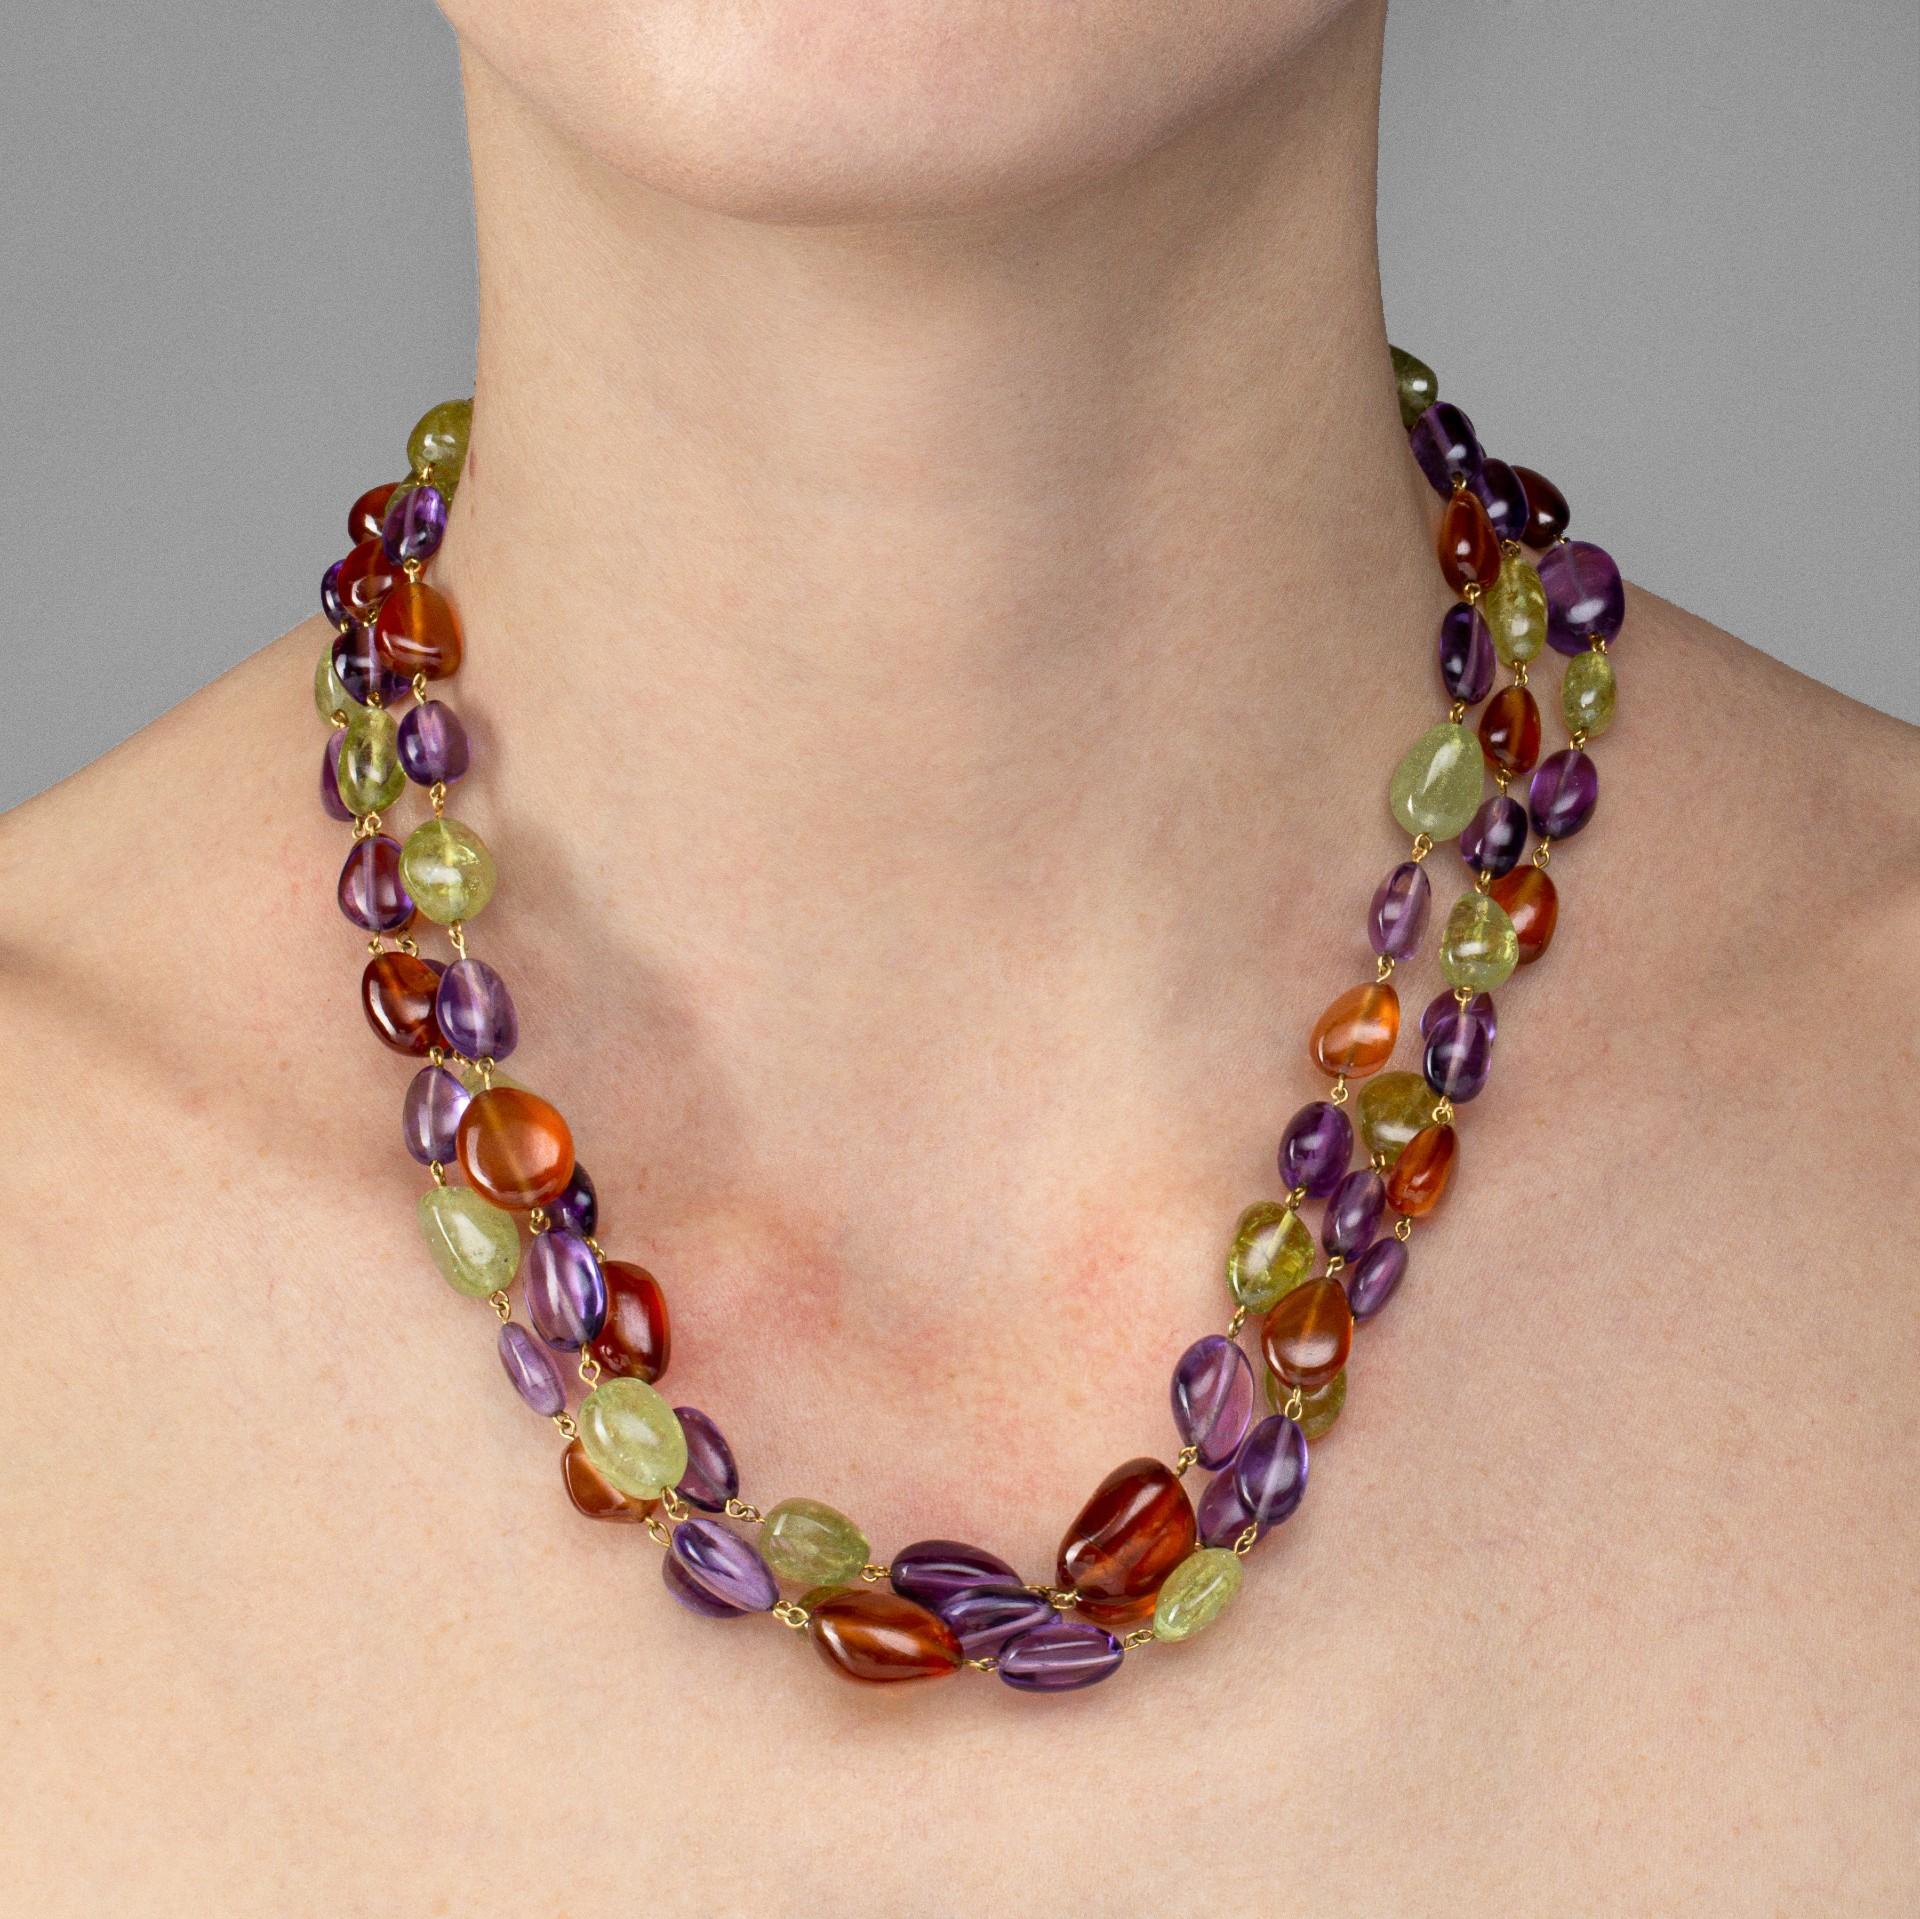 Alex Jona design collection, hand crafted in Italy, 18 karat yellow gold multi-strand necklace, featuring 550 carats of peridots, amethysts and carnelians. Length: 18.5 to 19.3 inch long- 47 to 49 cm long.

Alex Jona jewels stand out, not only for